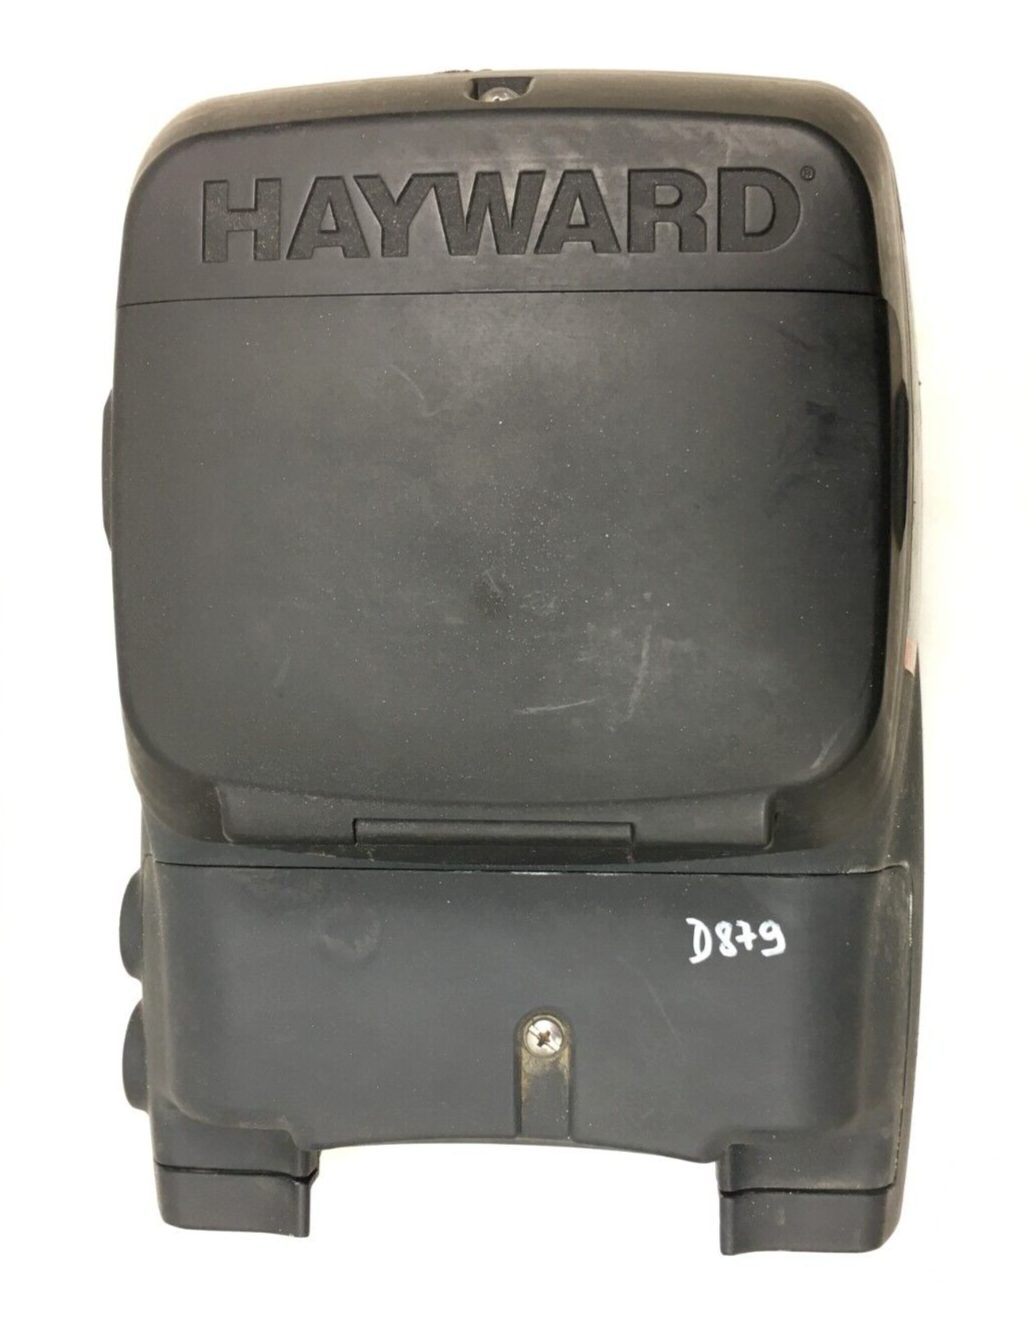 Primary image for HAYWARD SP3200DR Variable Speed Motor Drive Unit ONLY 090044-311 used #D879